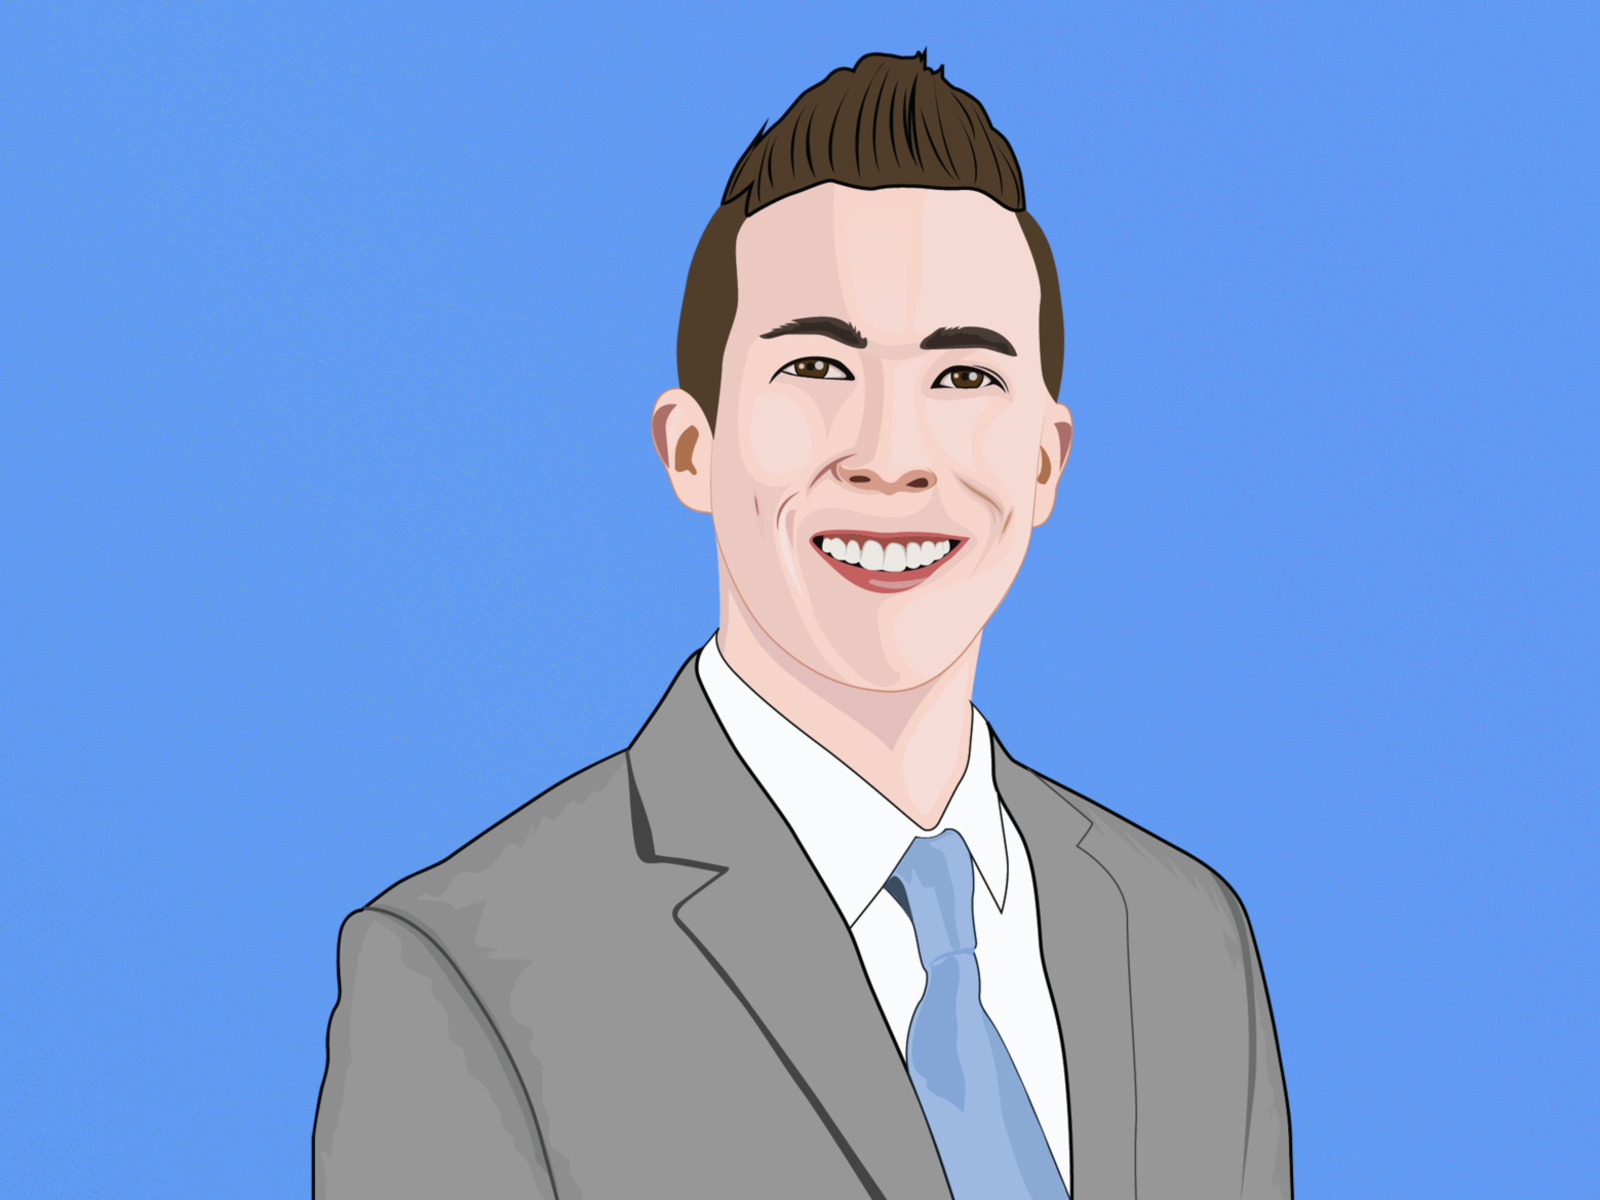 Cartoon Portrait for facebook profile pic by Roton Chanra Roy on Dribbble